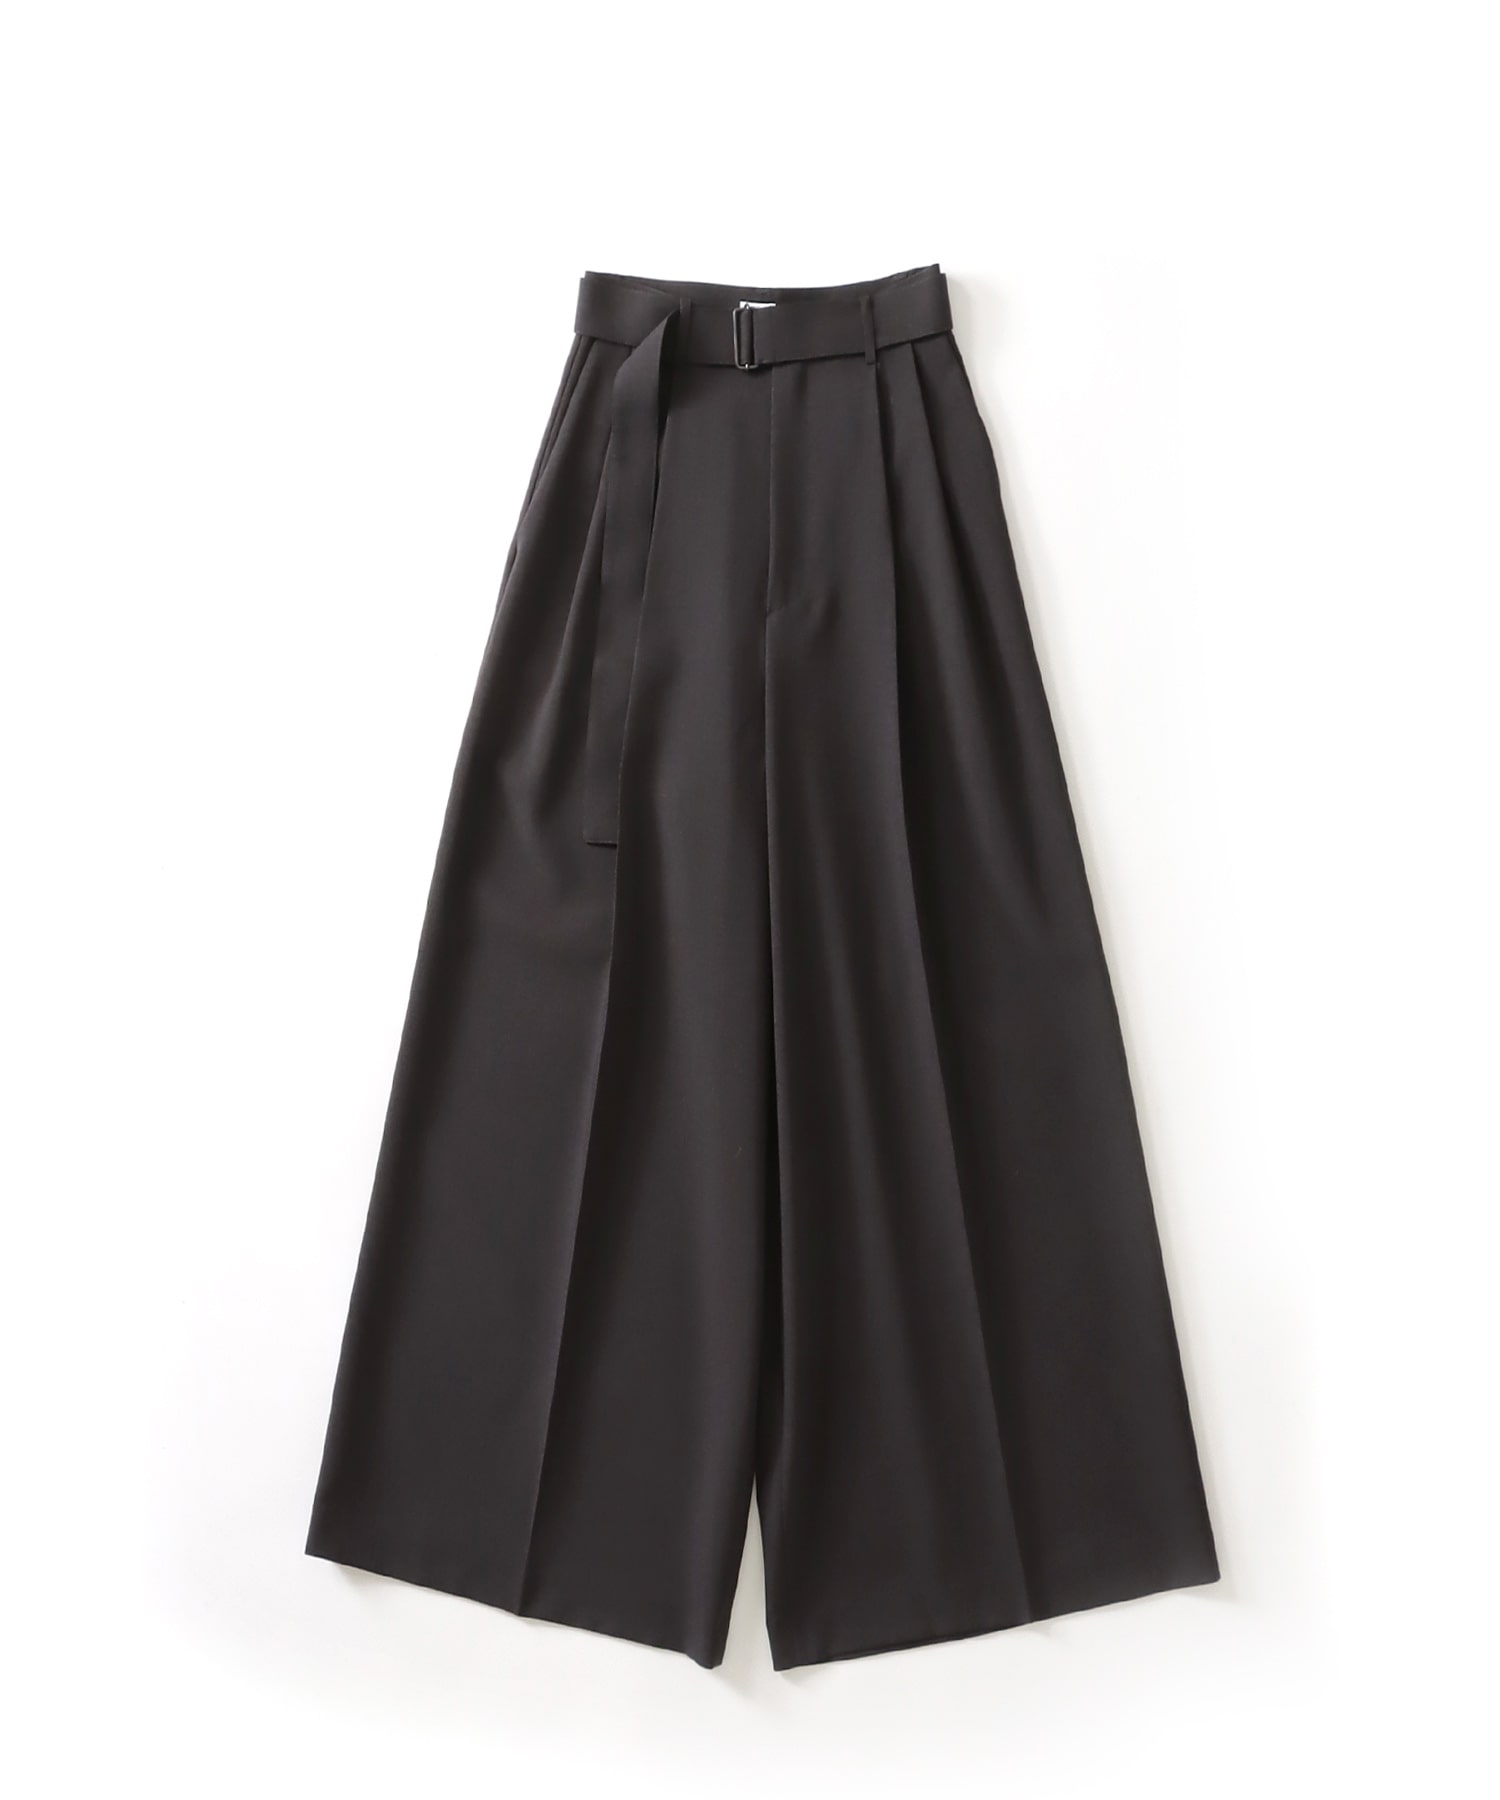 SARADORA two tuck buggy pants | AND ON JIONE STORE（アンドオン